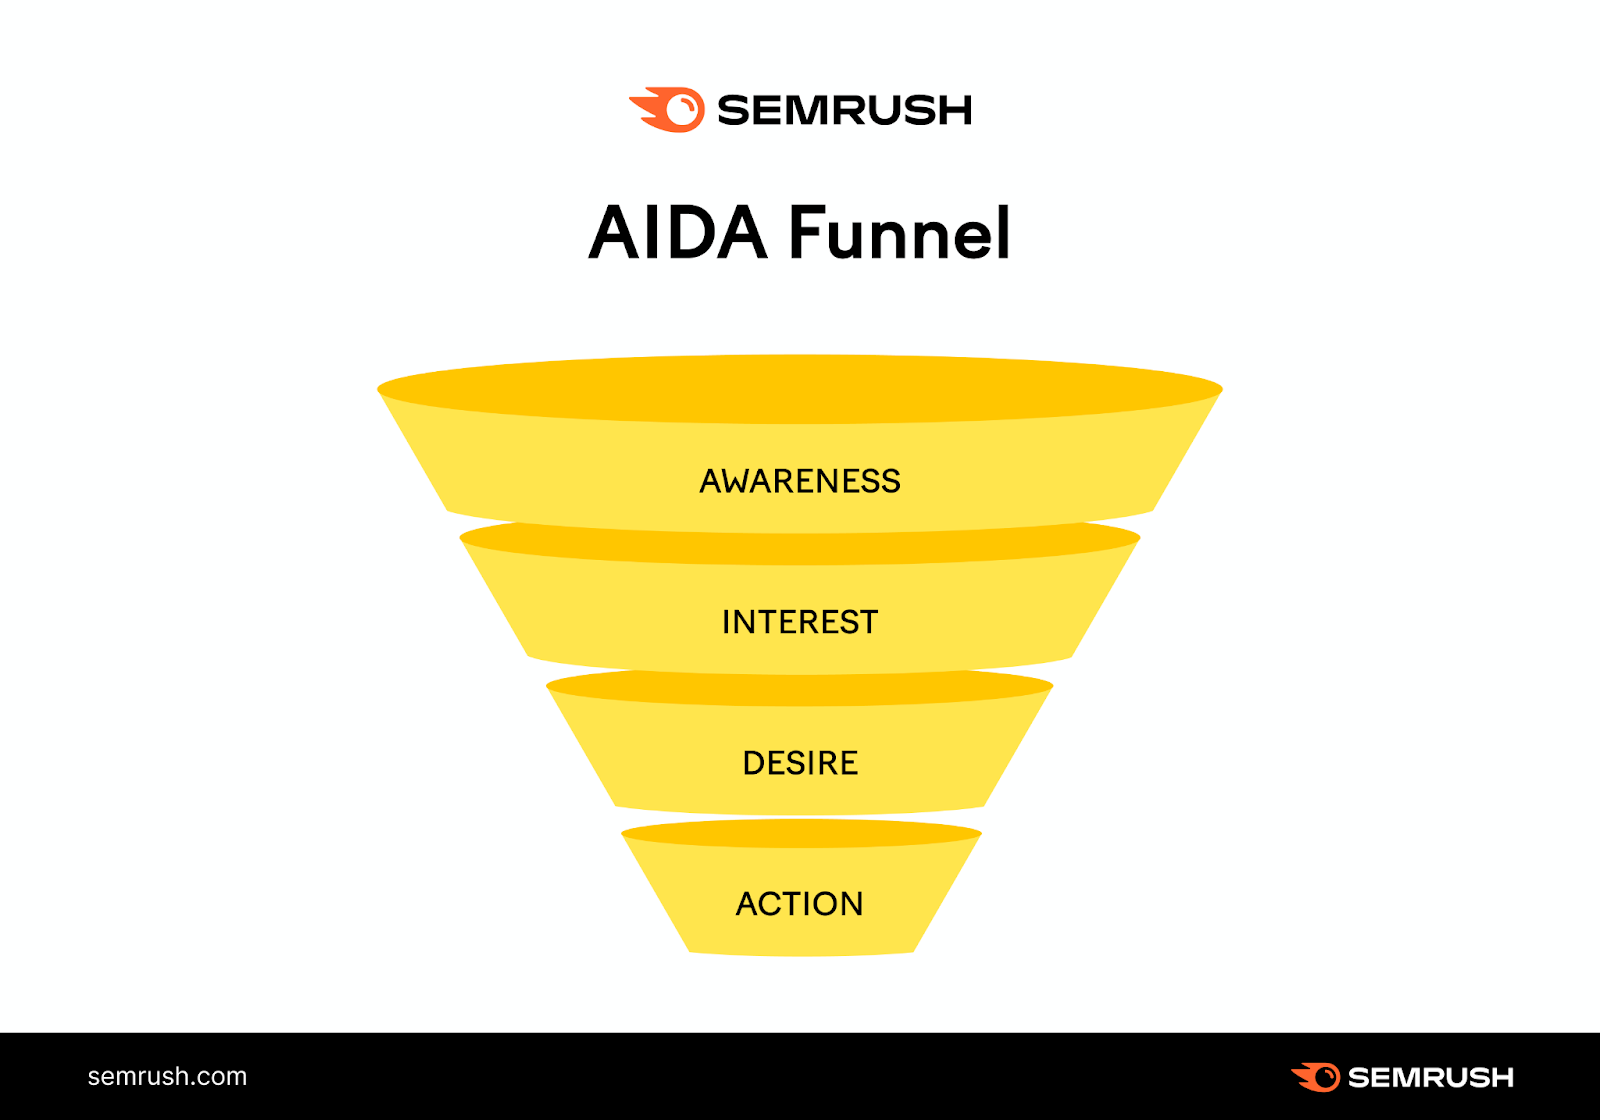 AIDA marketing funnel with "Awareness," "Interest," "Desire," and "Action" stages